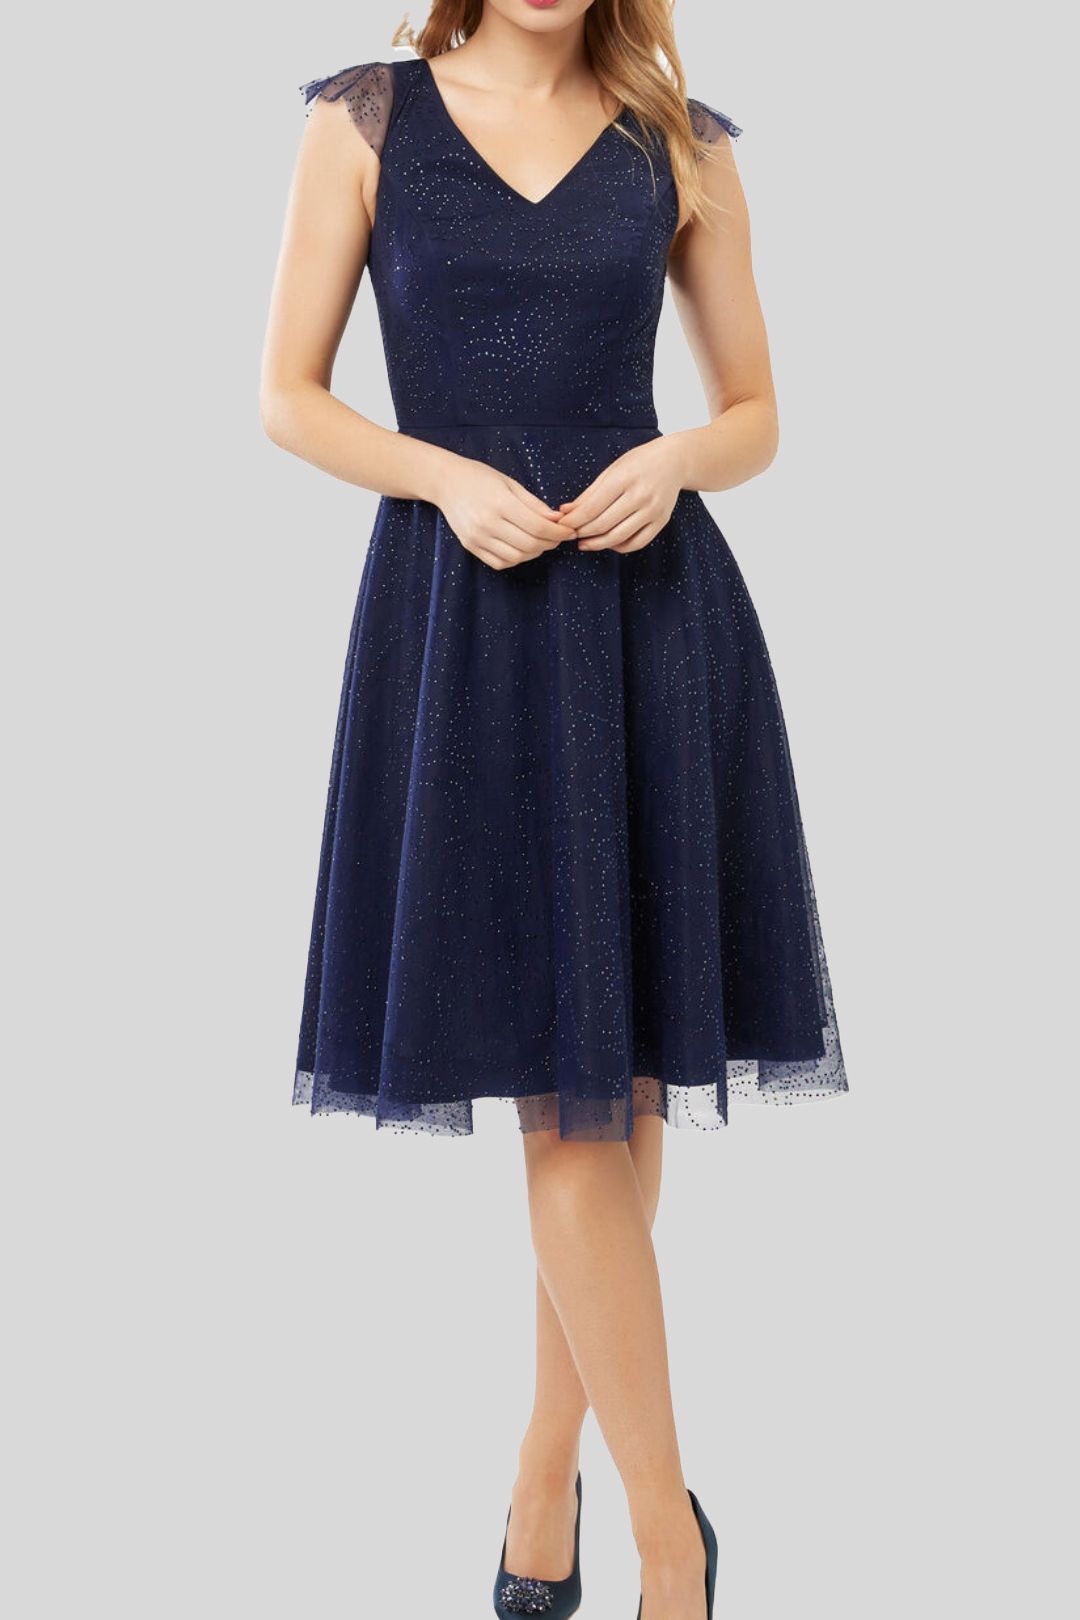 Review Raindrop on Roses Dress in Navy